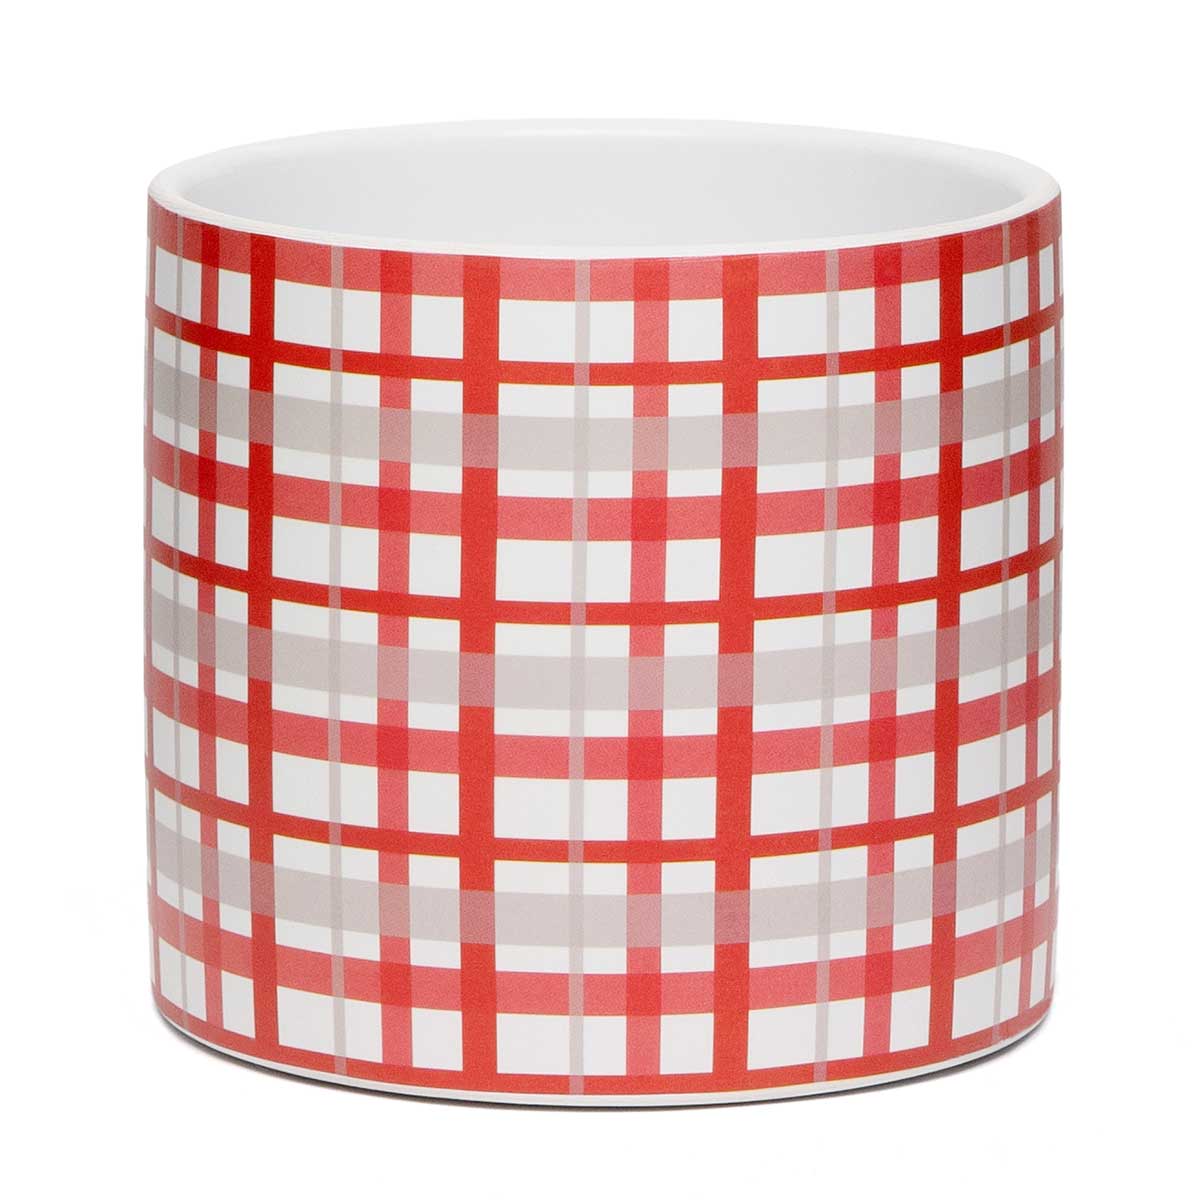 POT HOLIDAY PLAID LARGE 5.25IN X 4.75IN CERAMIC